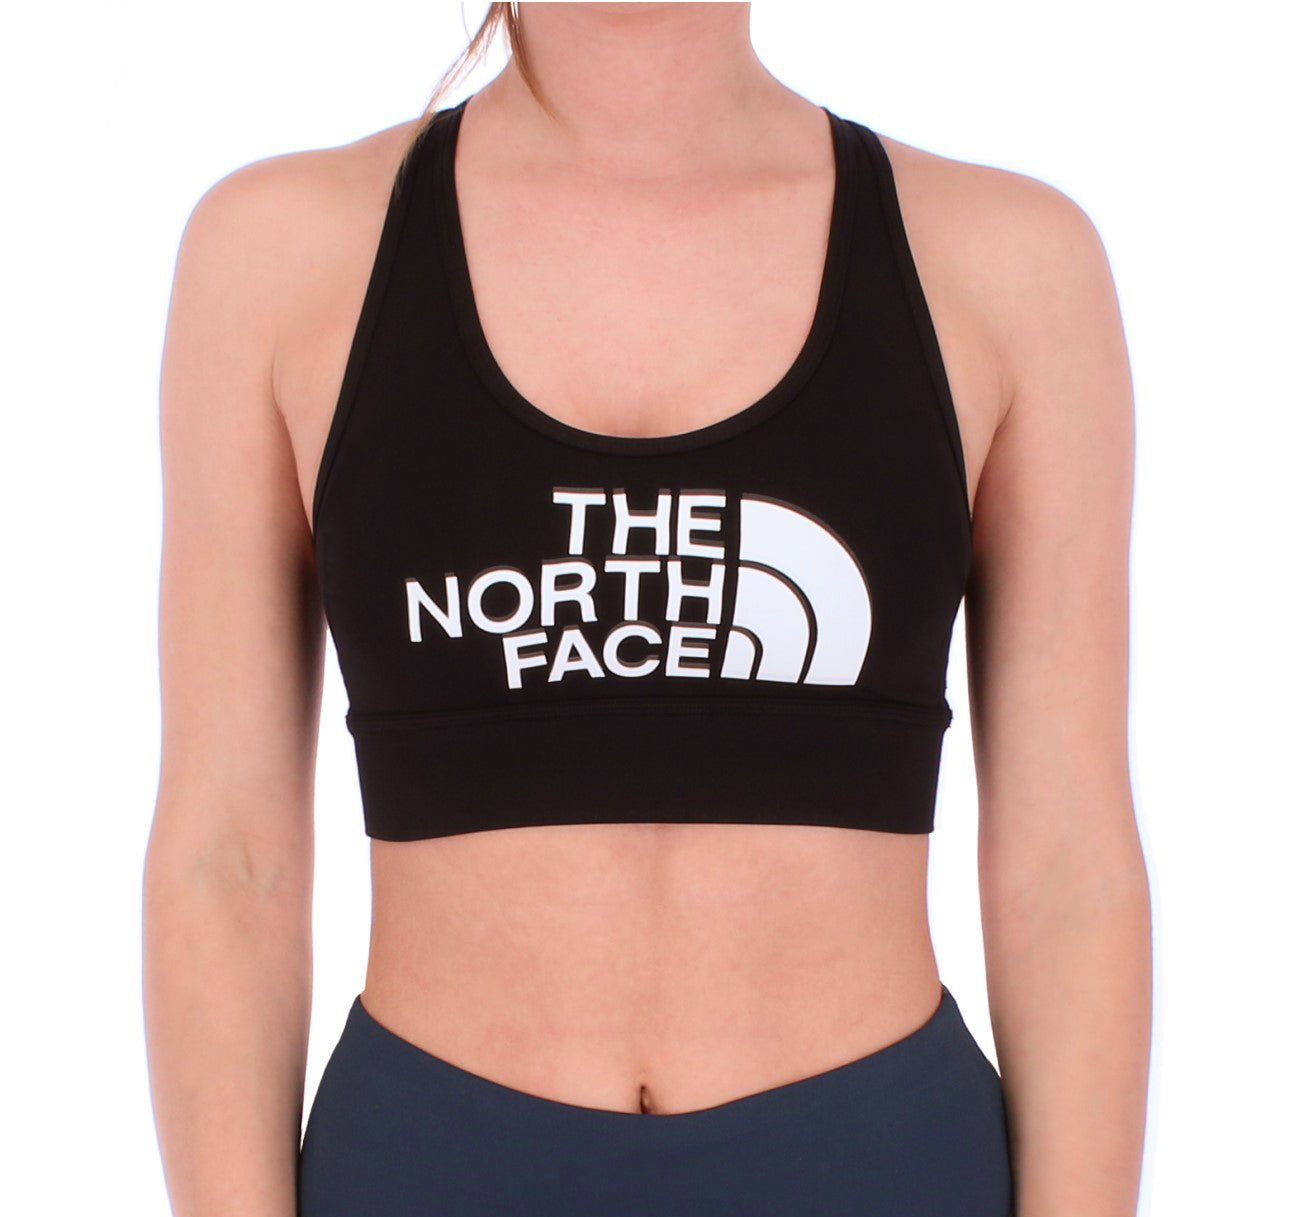 The North Face Bounce Be Gone Damen Sport BH - The North Face - SAGATOO - 192364008850